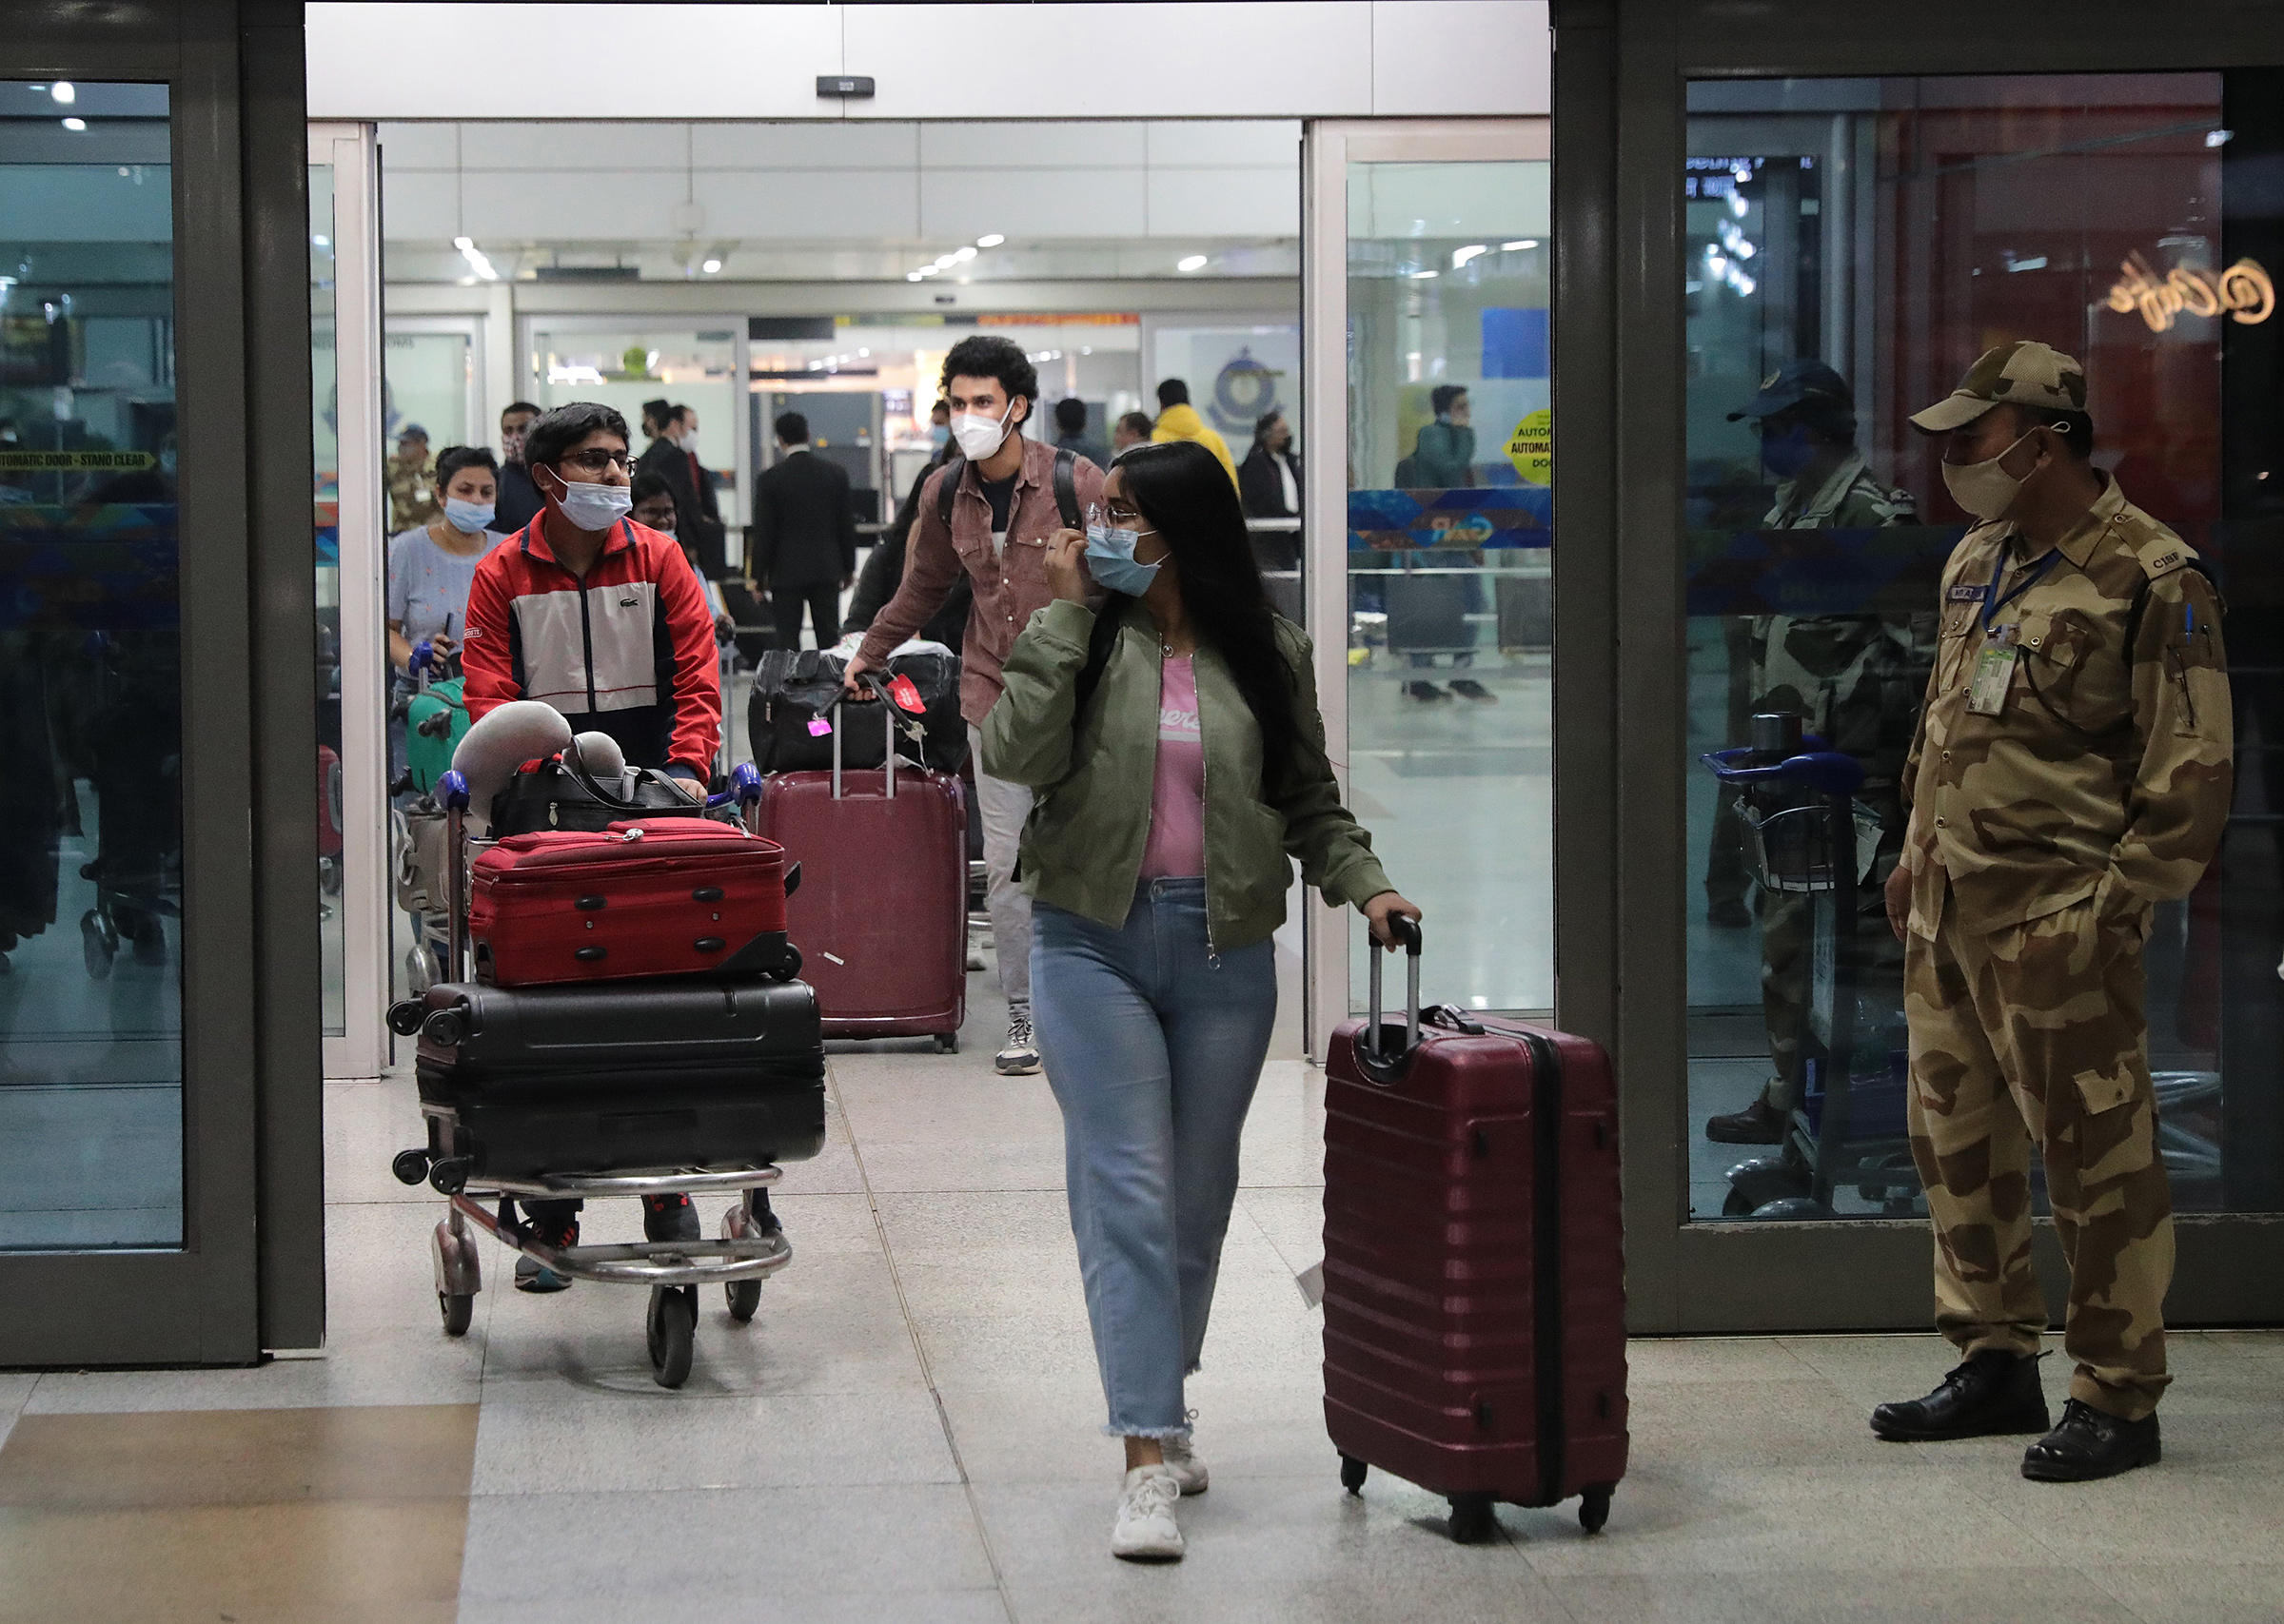 Indian students returning from Ukraine are received by their relatives amid the crisis, at Indira Gandhi International airport in New Delhi, Feb. 22 (Rajat Gupta—EPA-EFE/Shutterstock)